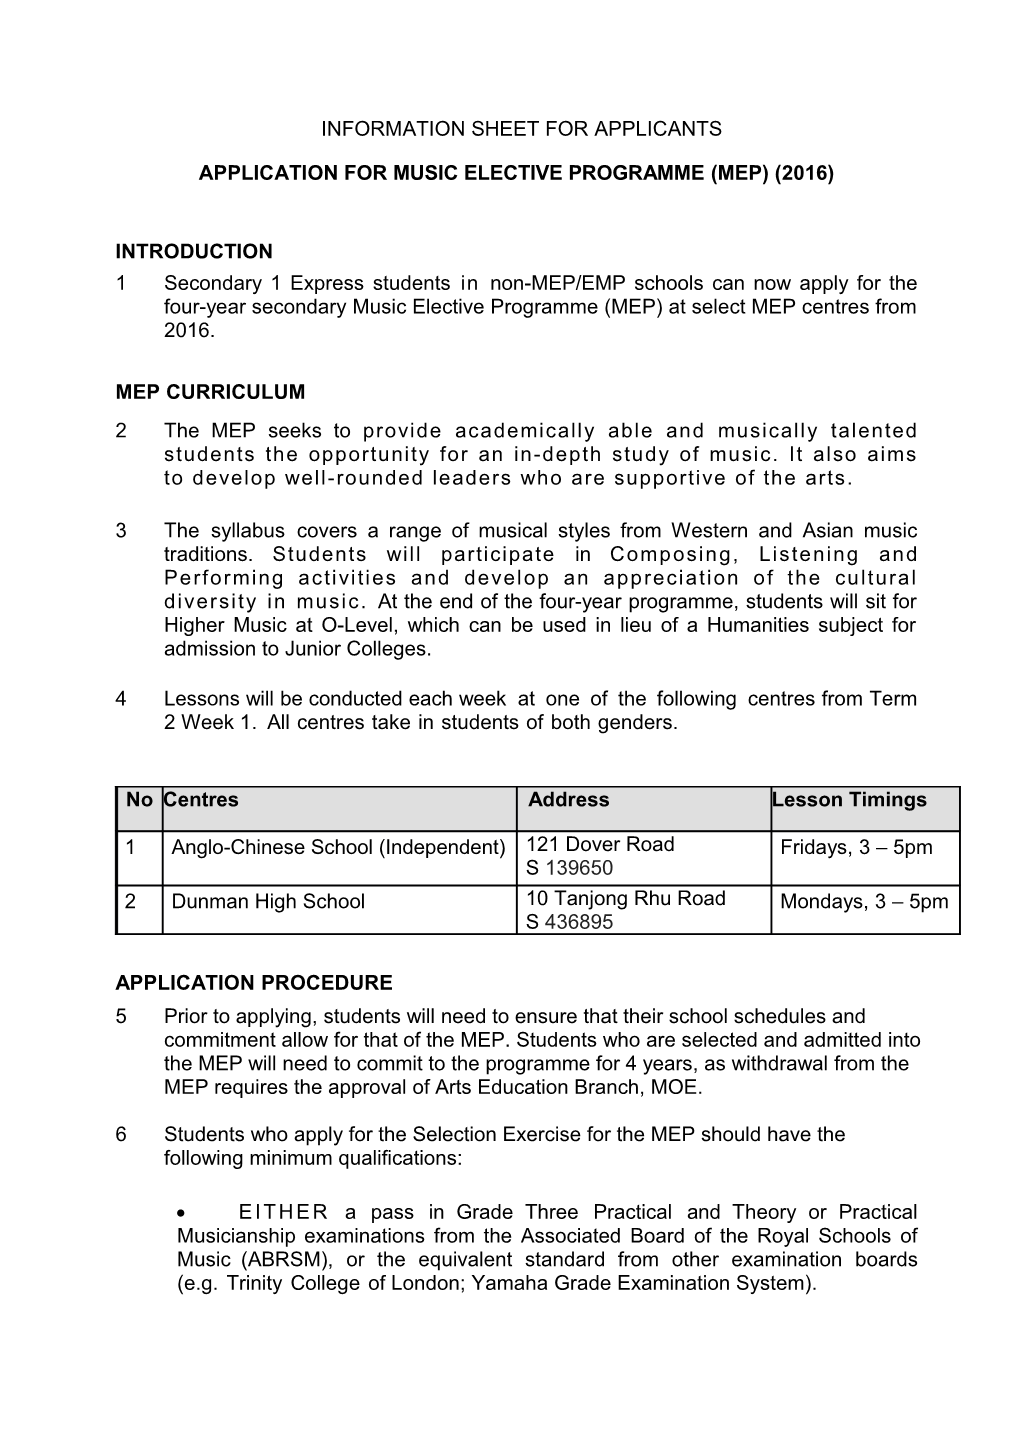 Application for Music Elective Programme (Mep) (2016)